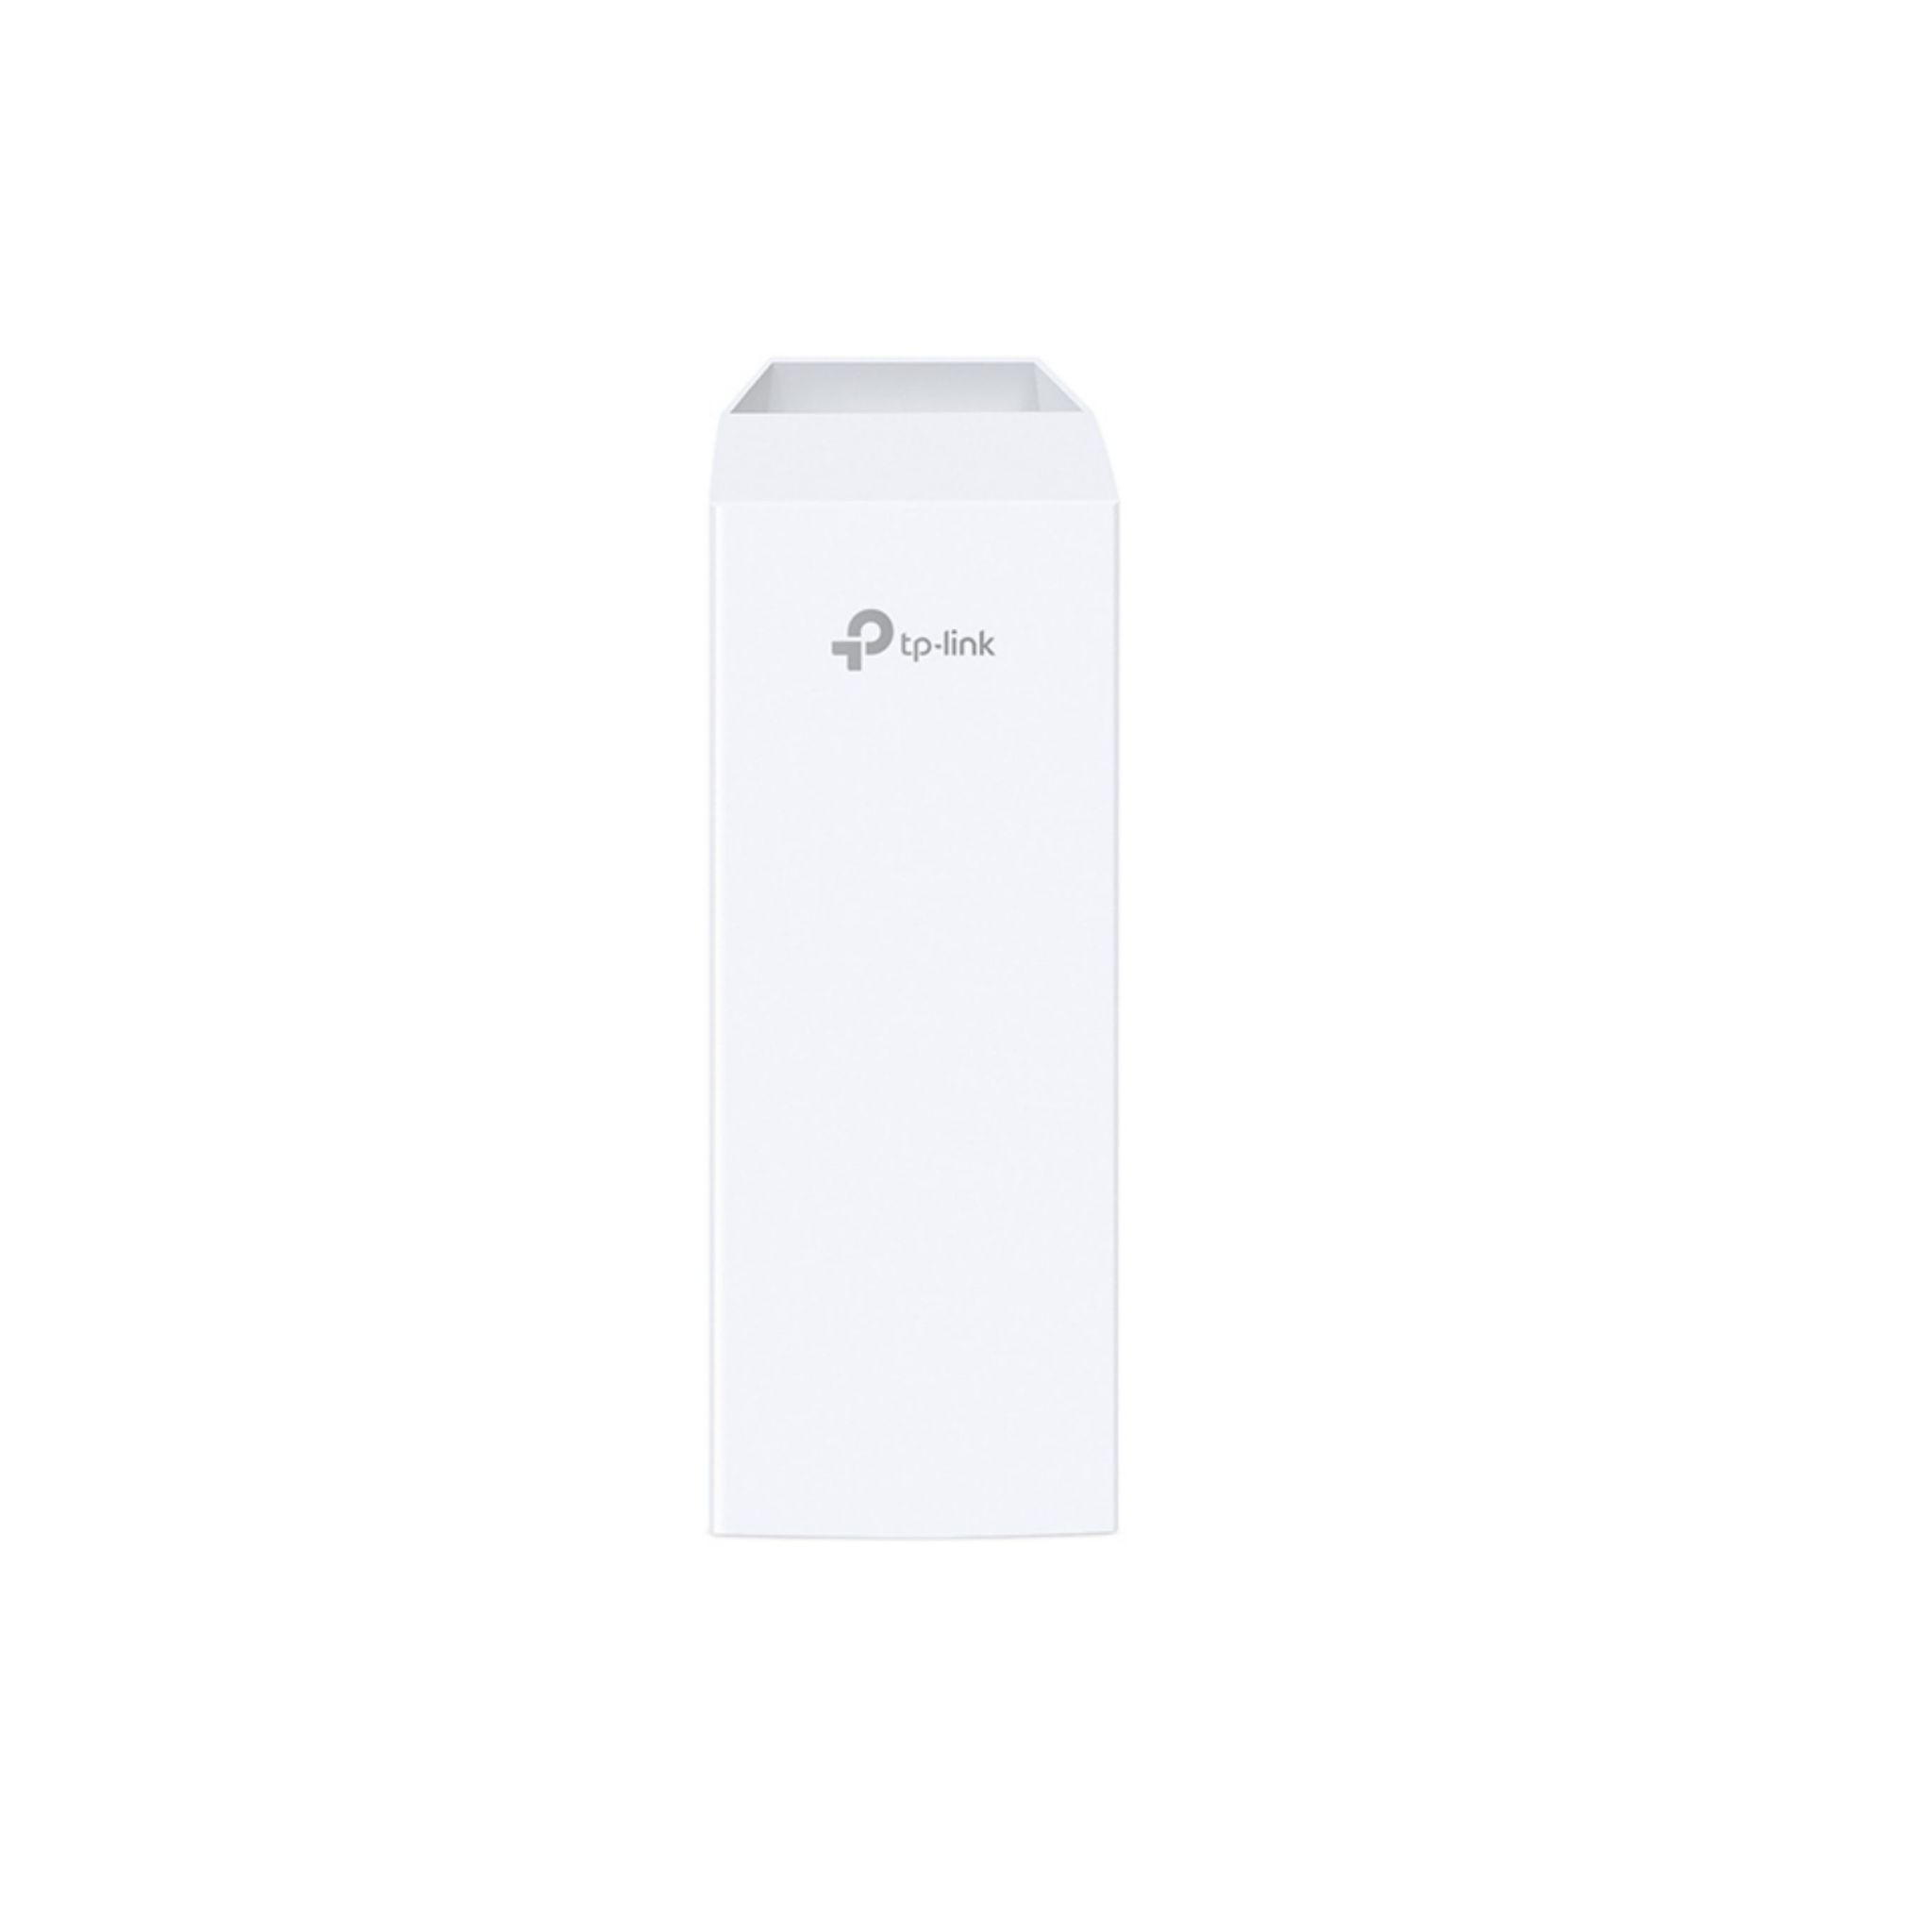 Point Mbit/s Access TP-LINK Point Access 300 WLAN Outdoor Wireless CPE510